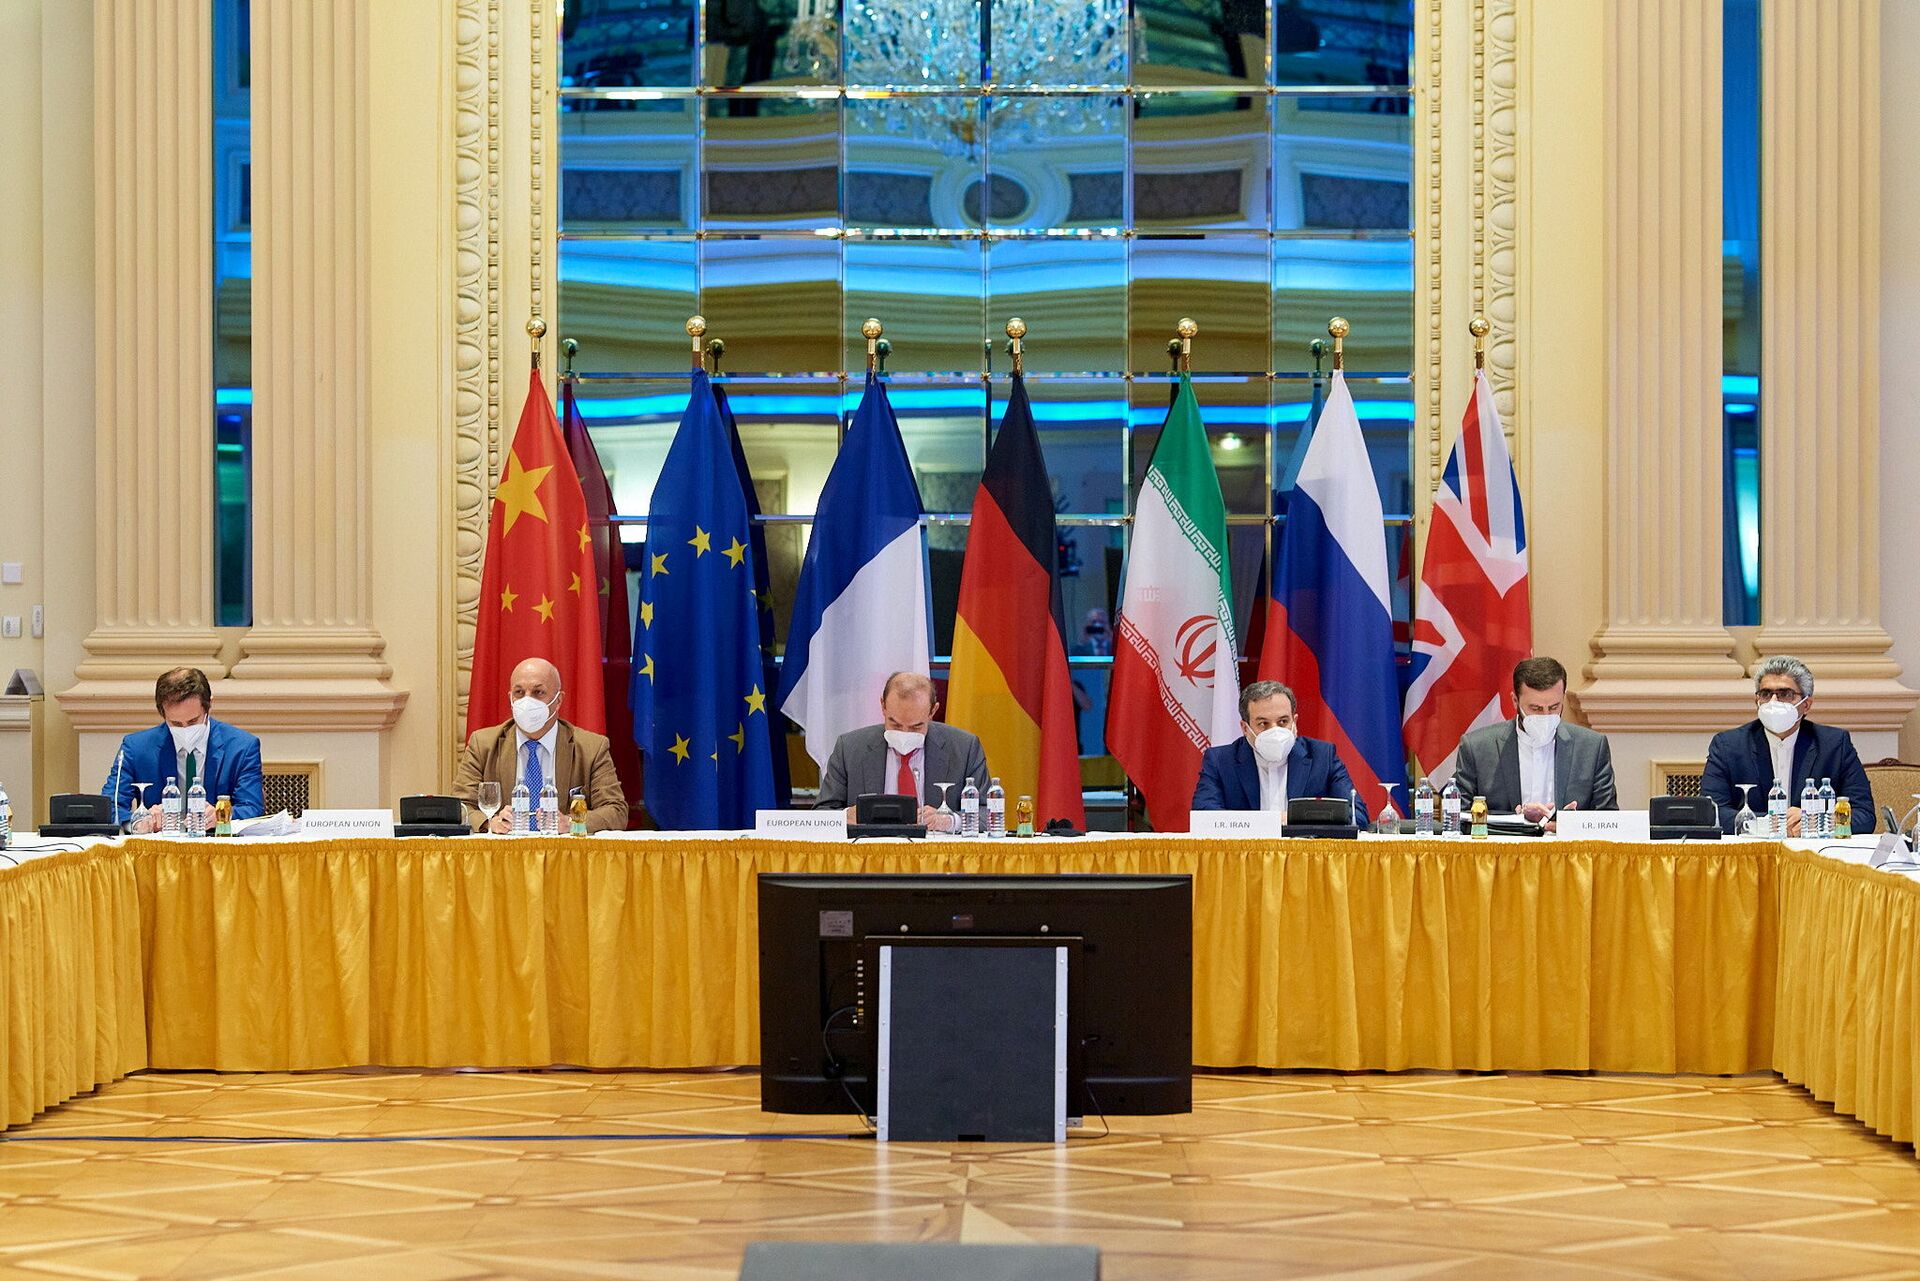 European External Action Service (EEAS) Deputy Secretary General Enrique Mora and Iranian Deputy at Ministry of Foreign Affairs Abbas Araghchi wait for the start of talks on reviving the 2015 Iran nuclear deal in Vienna, Austria June 20, 2021 - Sputnik International, 1920, 12.09.2021